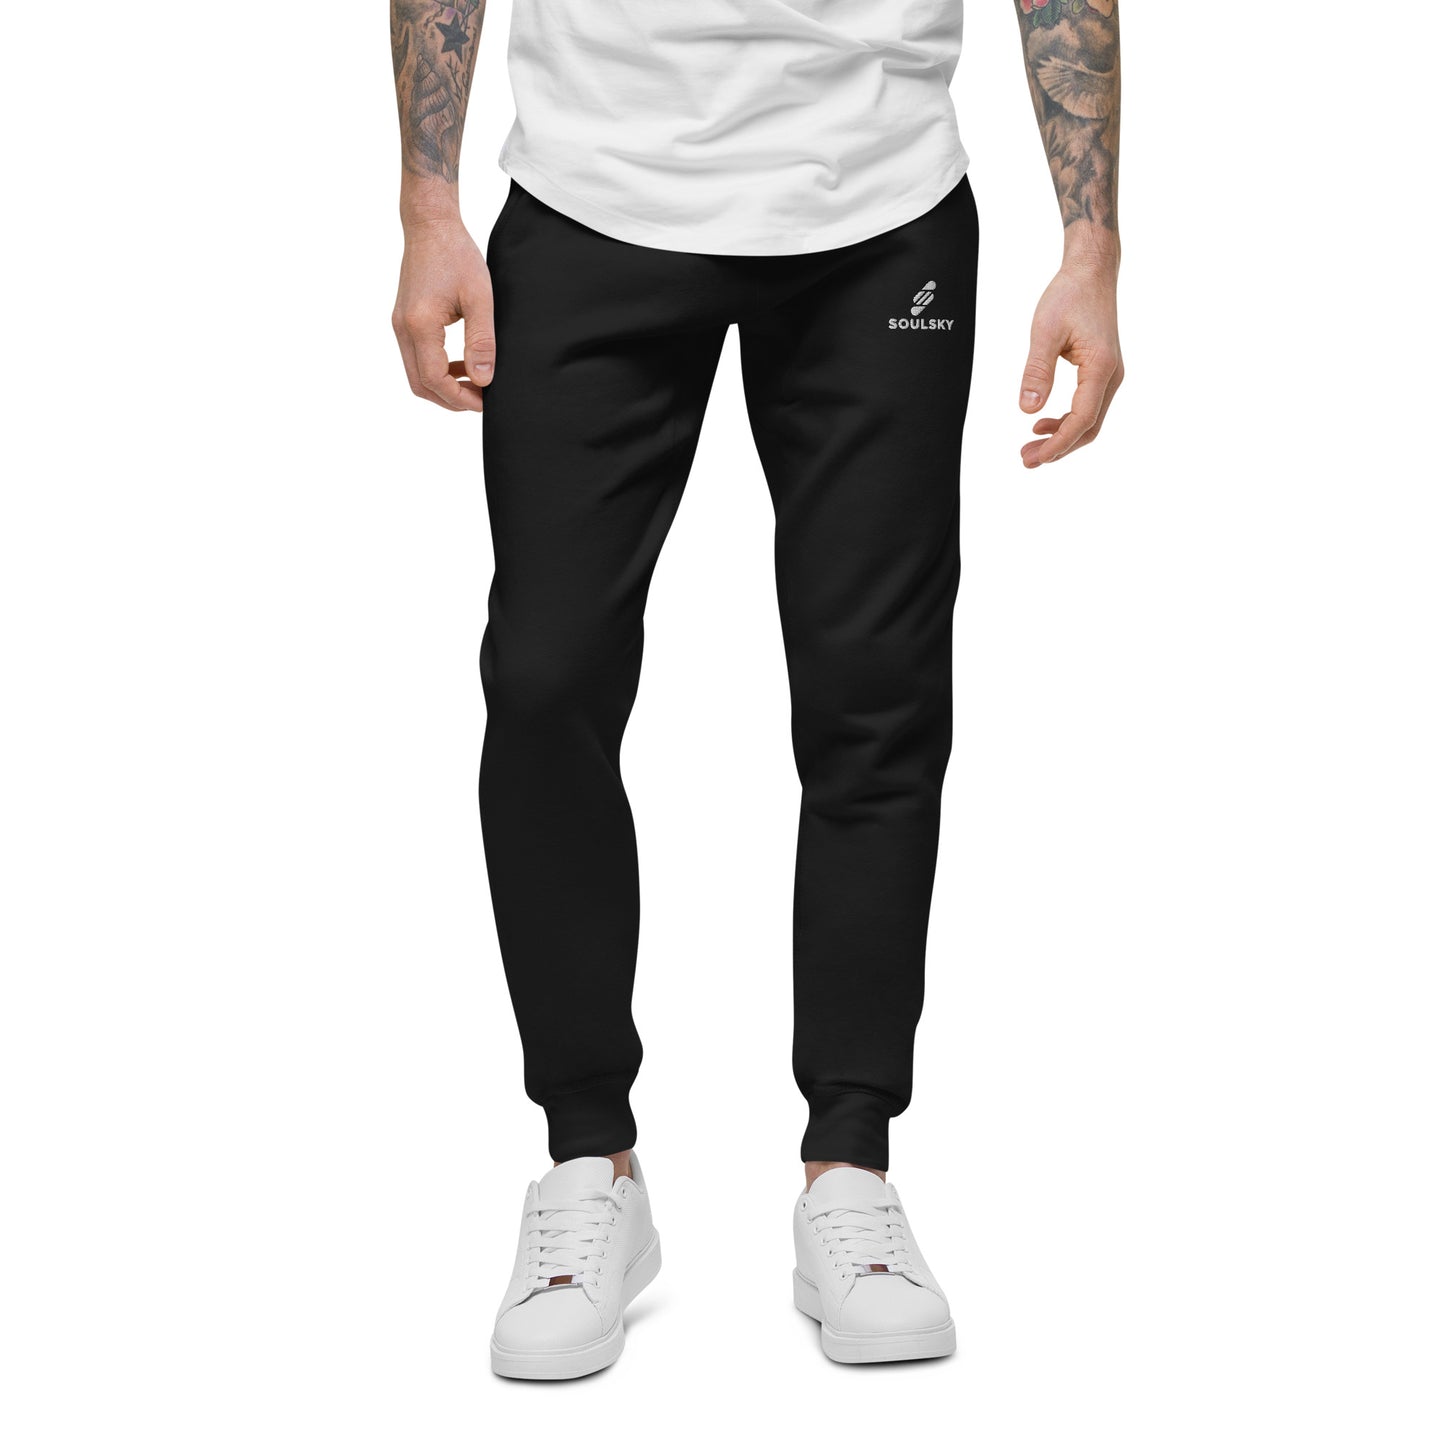 Male model wearing black unisex joggers with white embroidered logo on left thigh that says "SOULSKY".